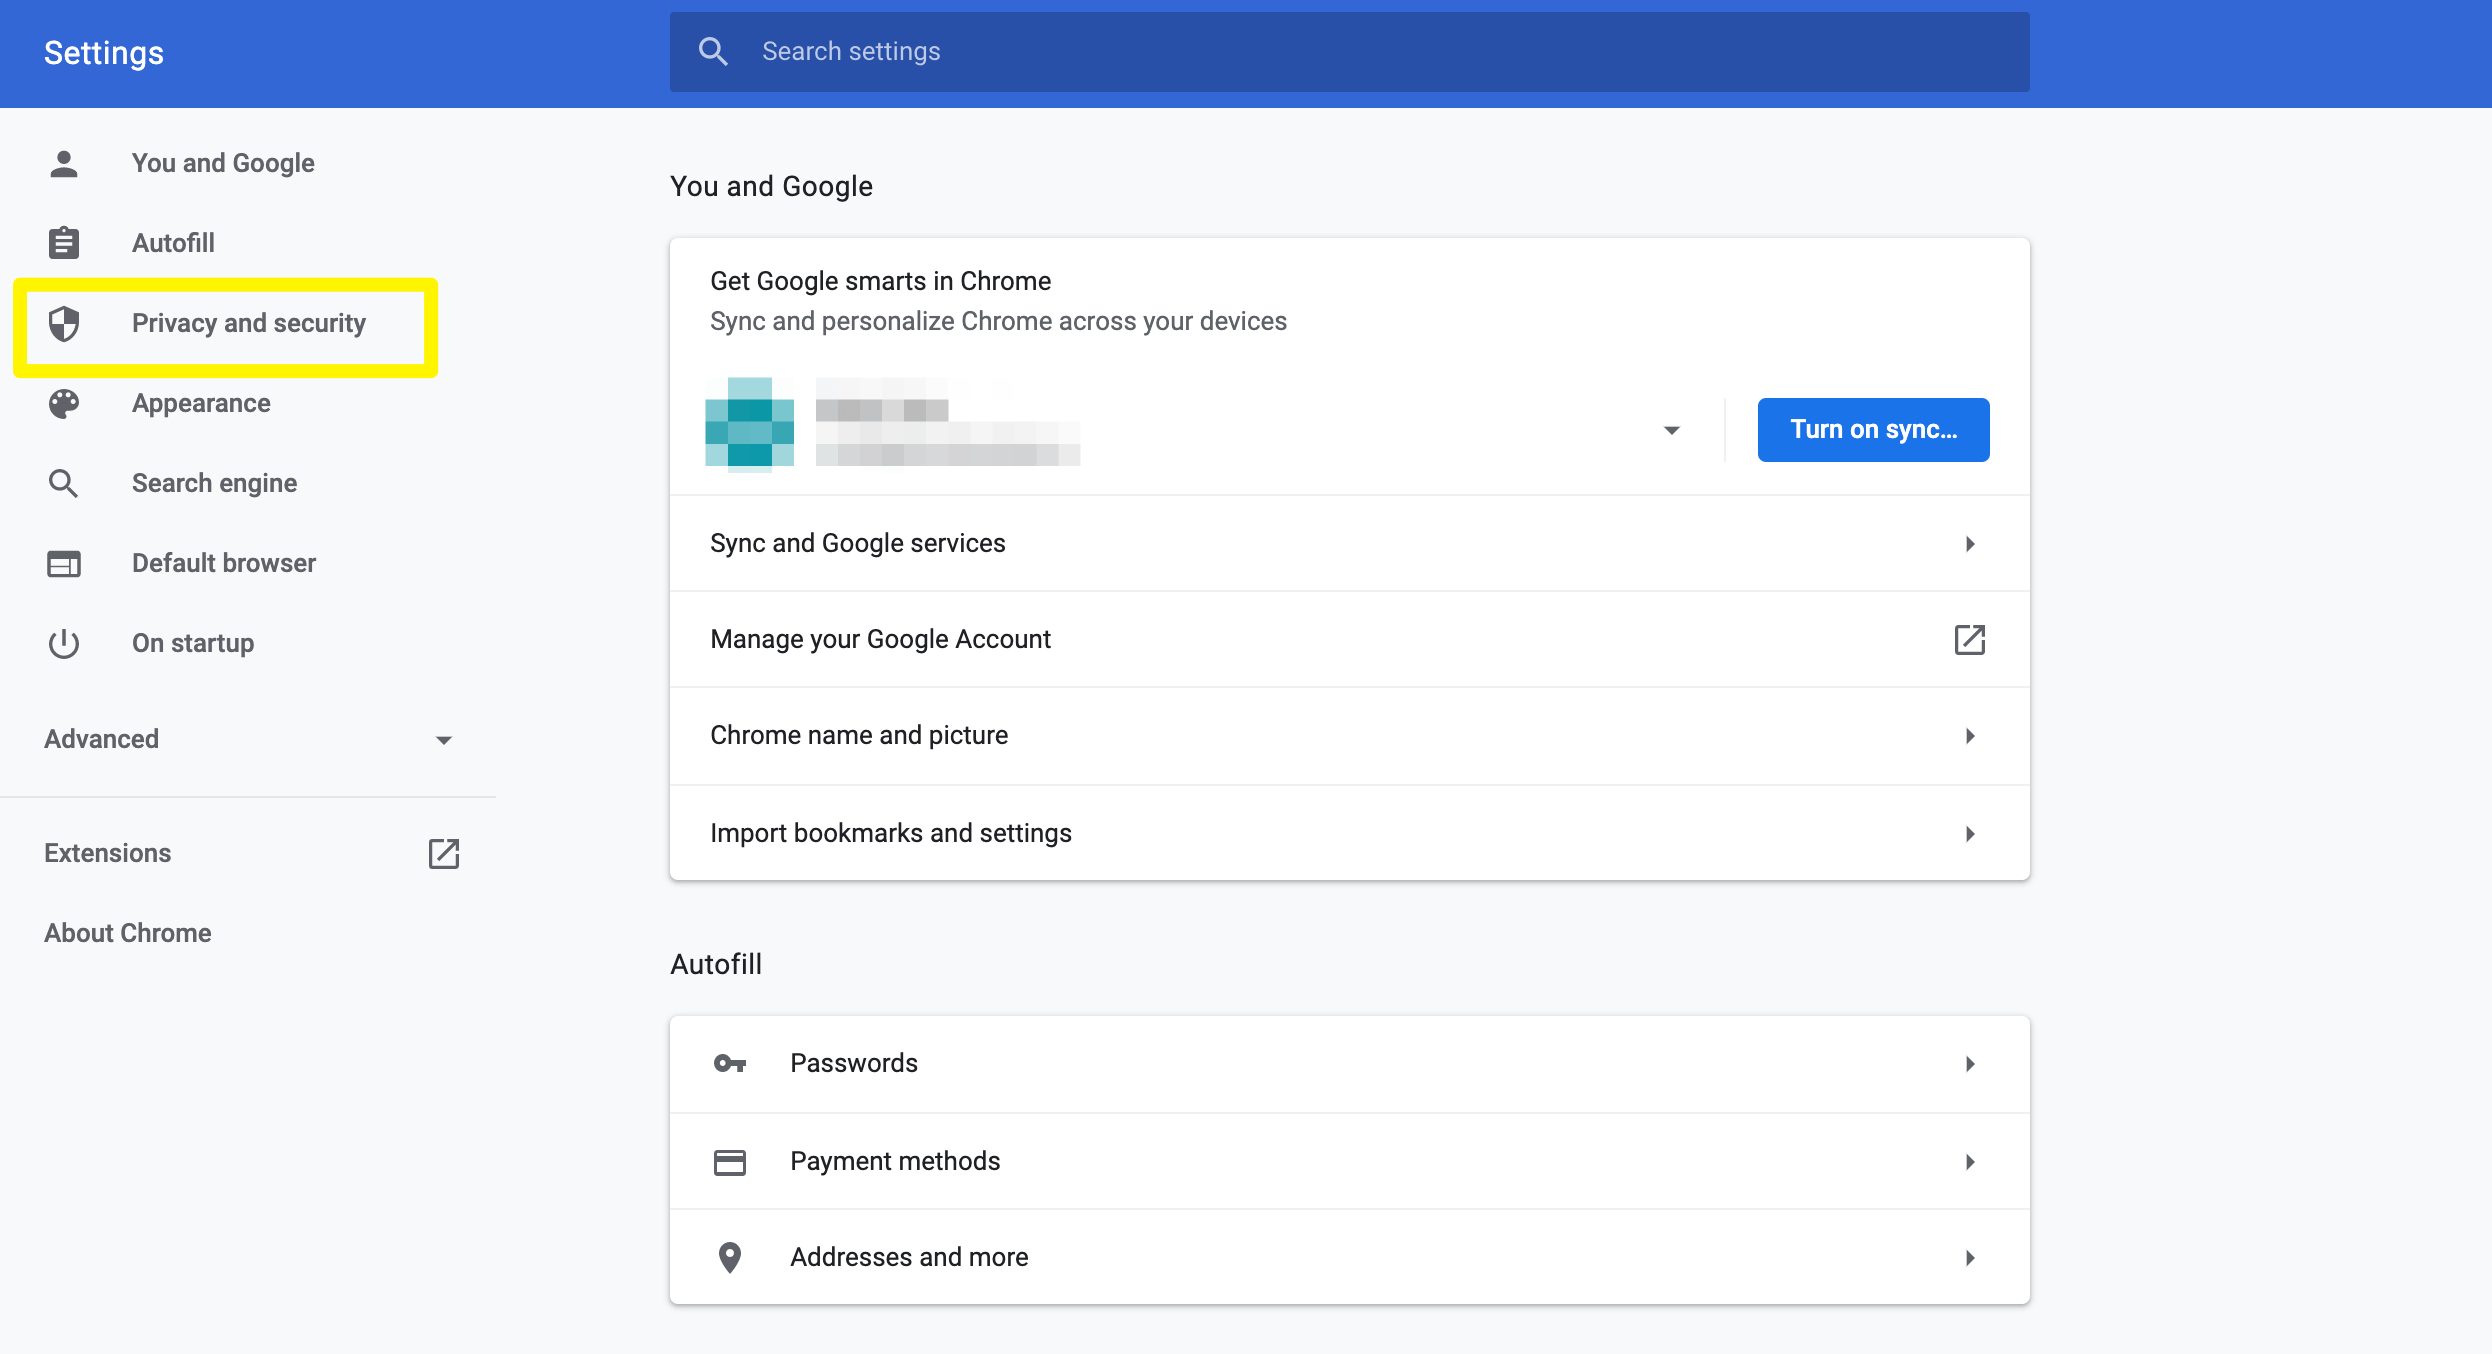 Accessing the Chrome Privacy and Security settings.